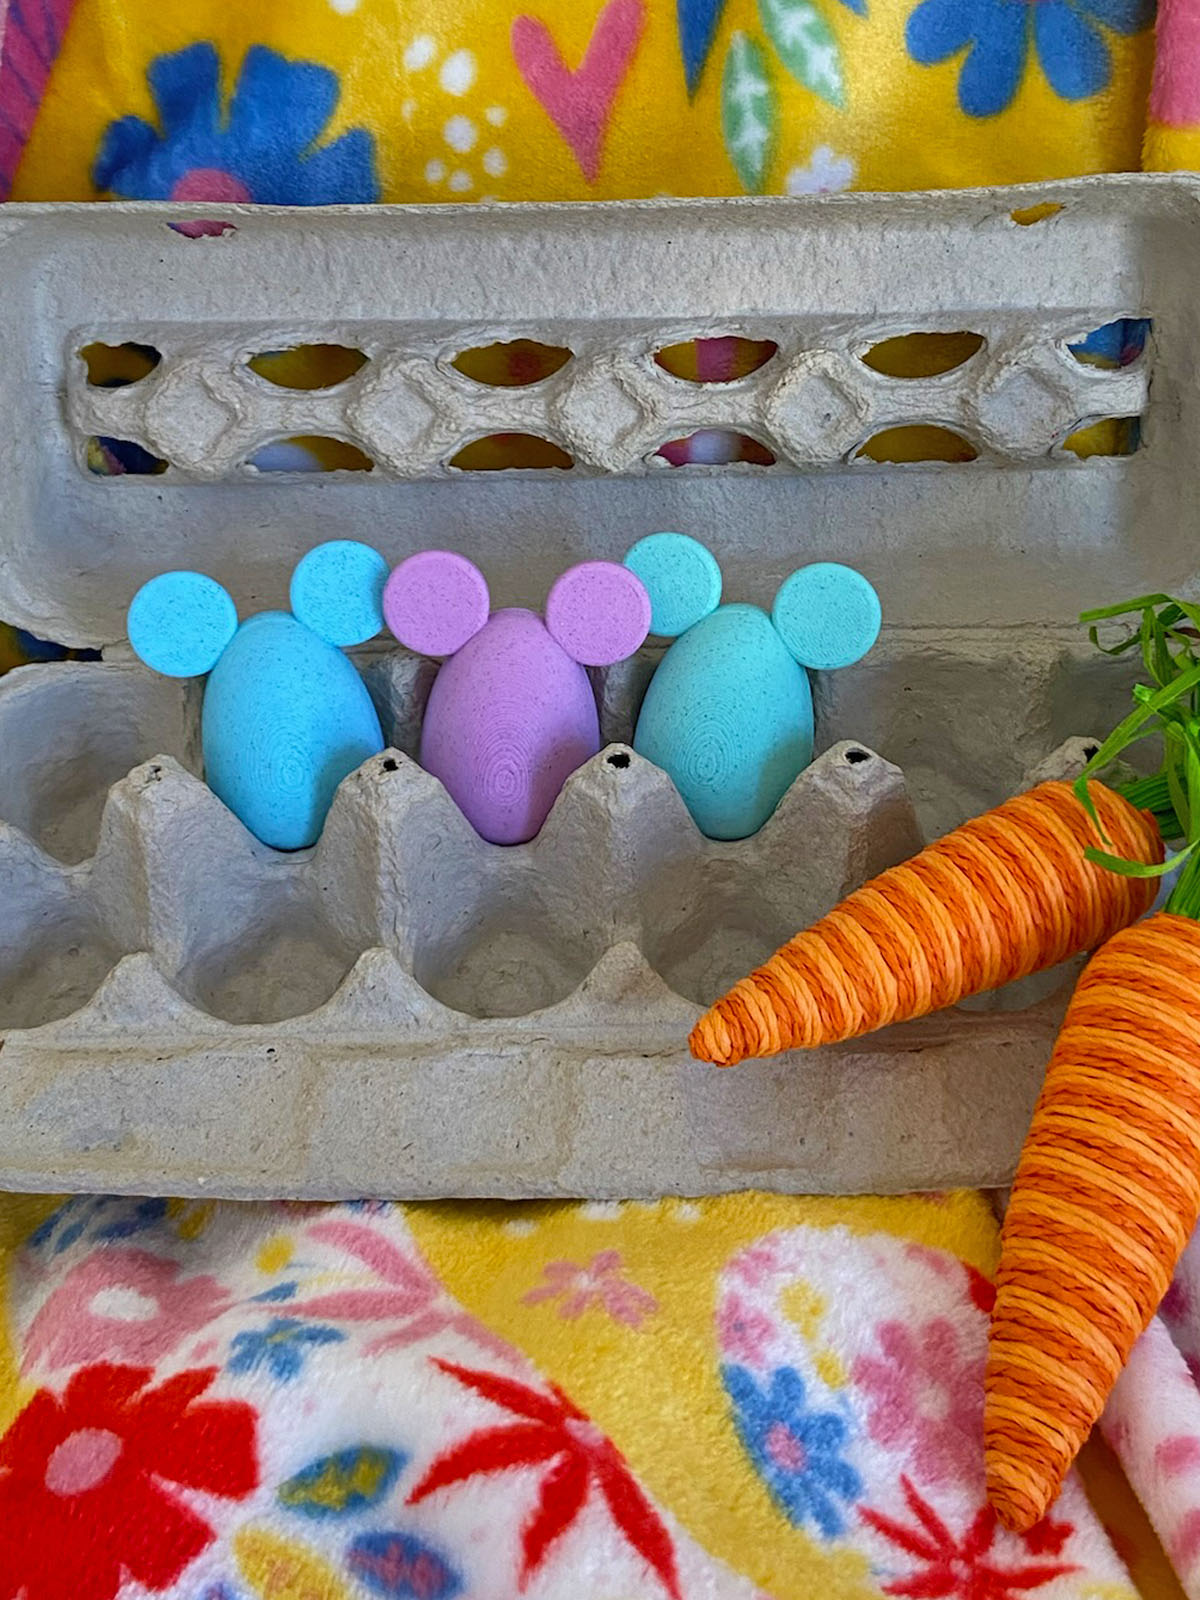 Small Eggs with Ears 3 pc Set